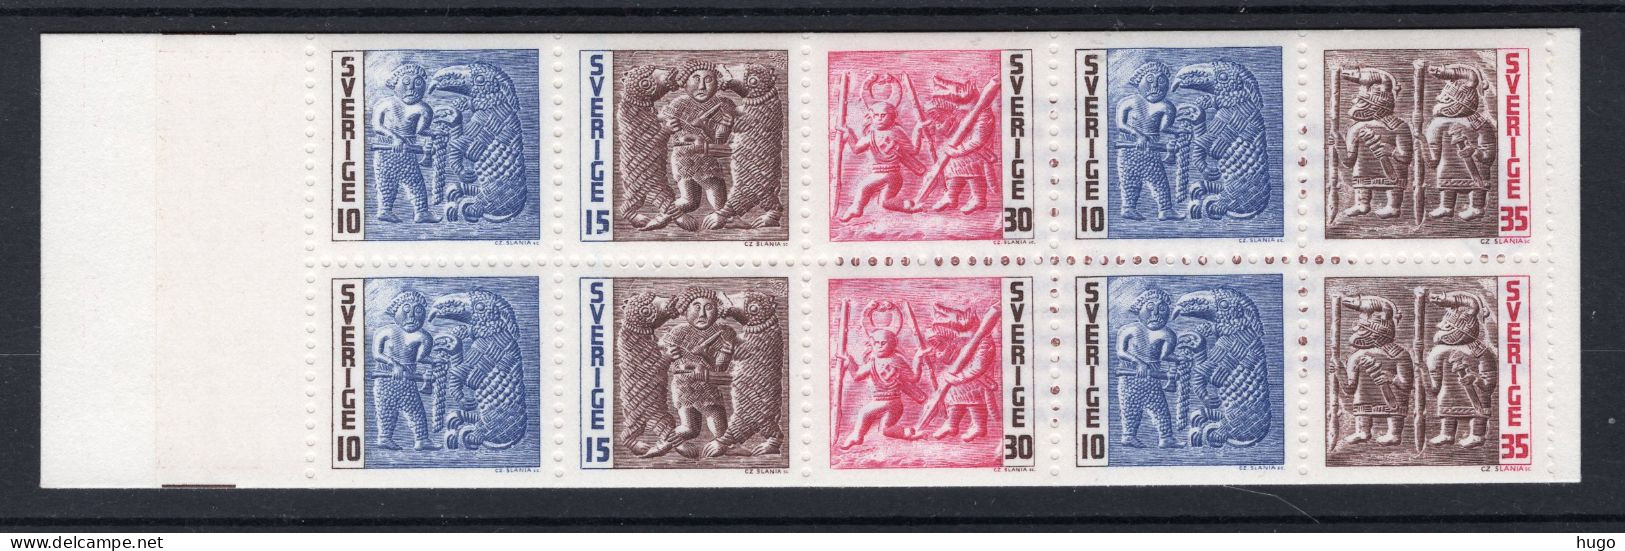 ZWITSERLAND Yt. 468° Gestempeld 1948 - Used Stamps